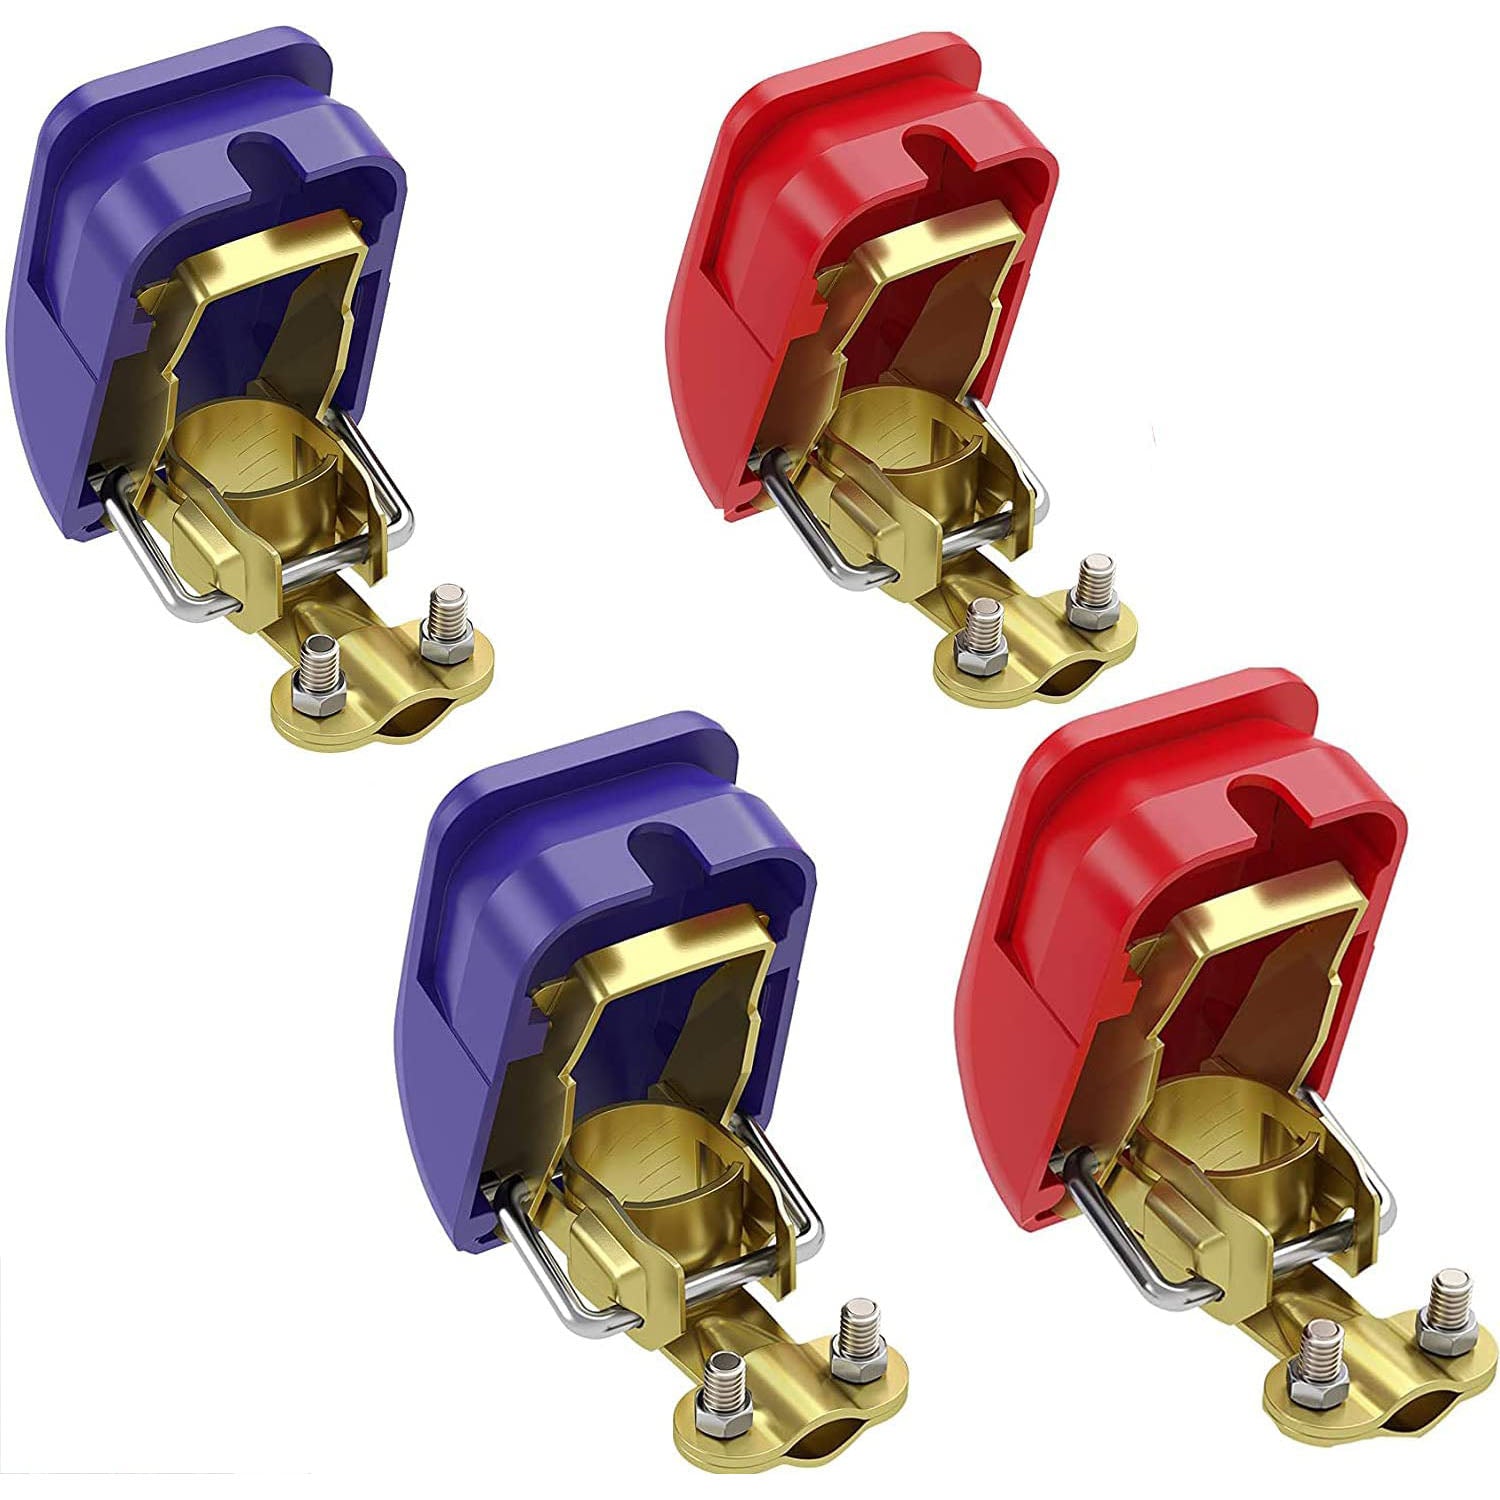 eSynic 4Pcs Quick Release Battery Terminals Clamps